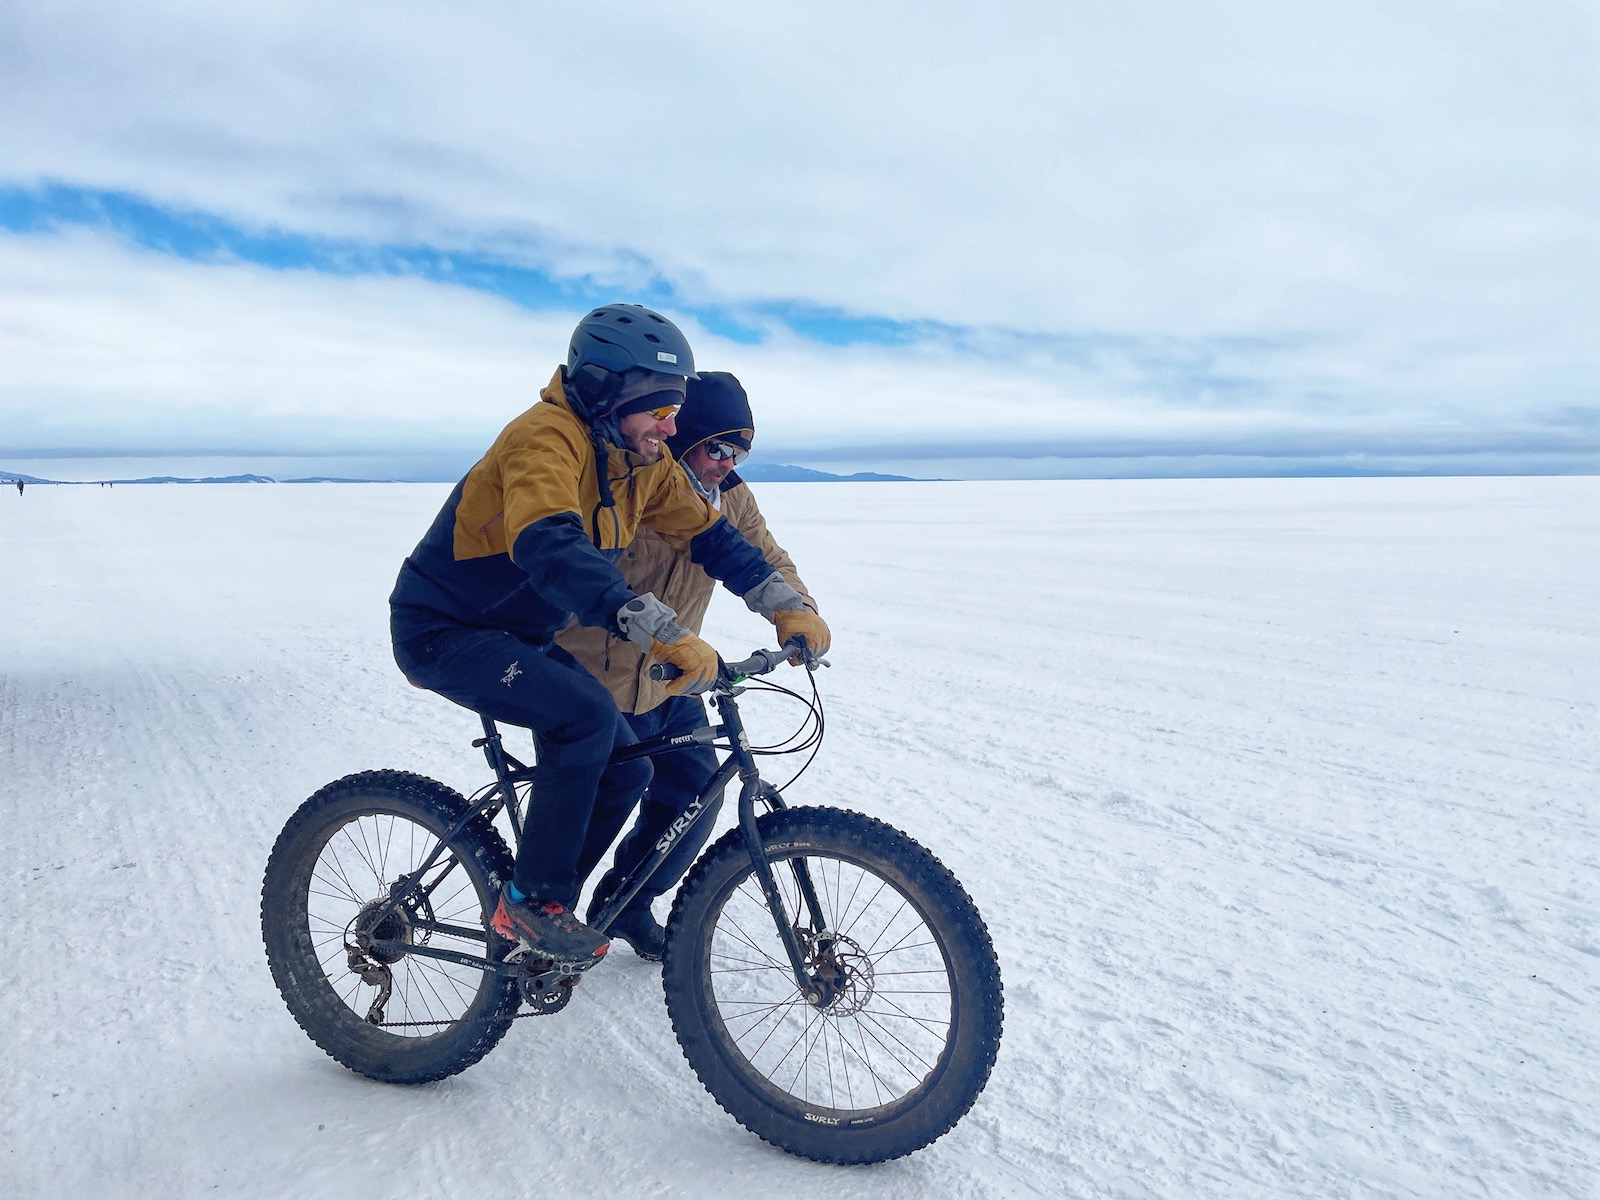 McMurdo hosts a marathon on the Ross Ice Shelf in January and allows running, cross-country, skiing, or fat biking.